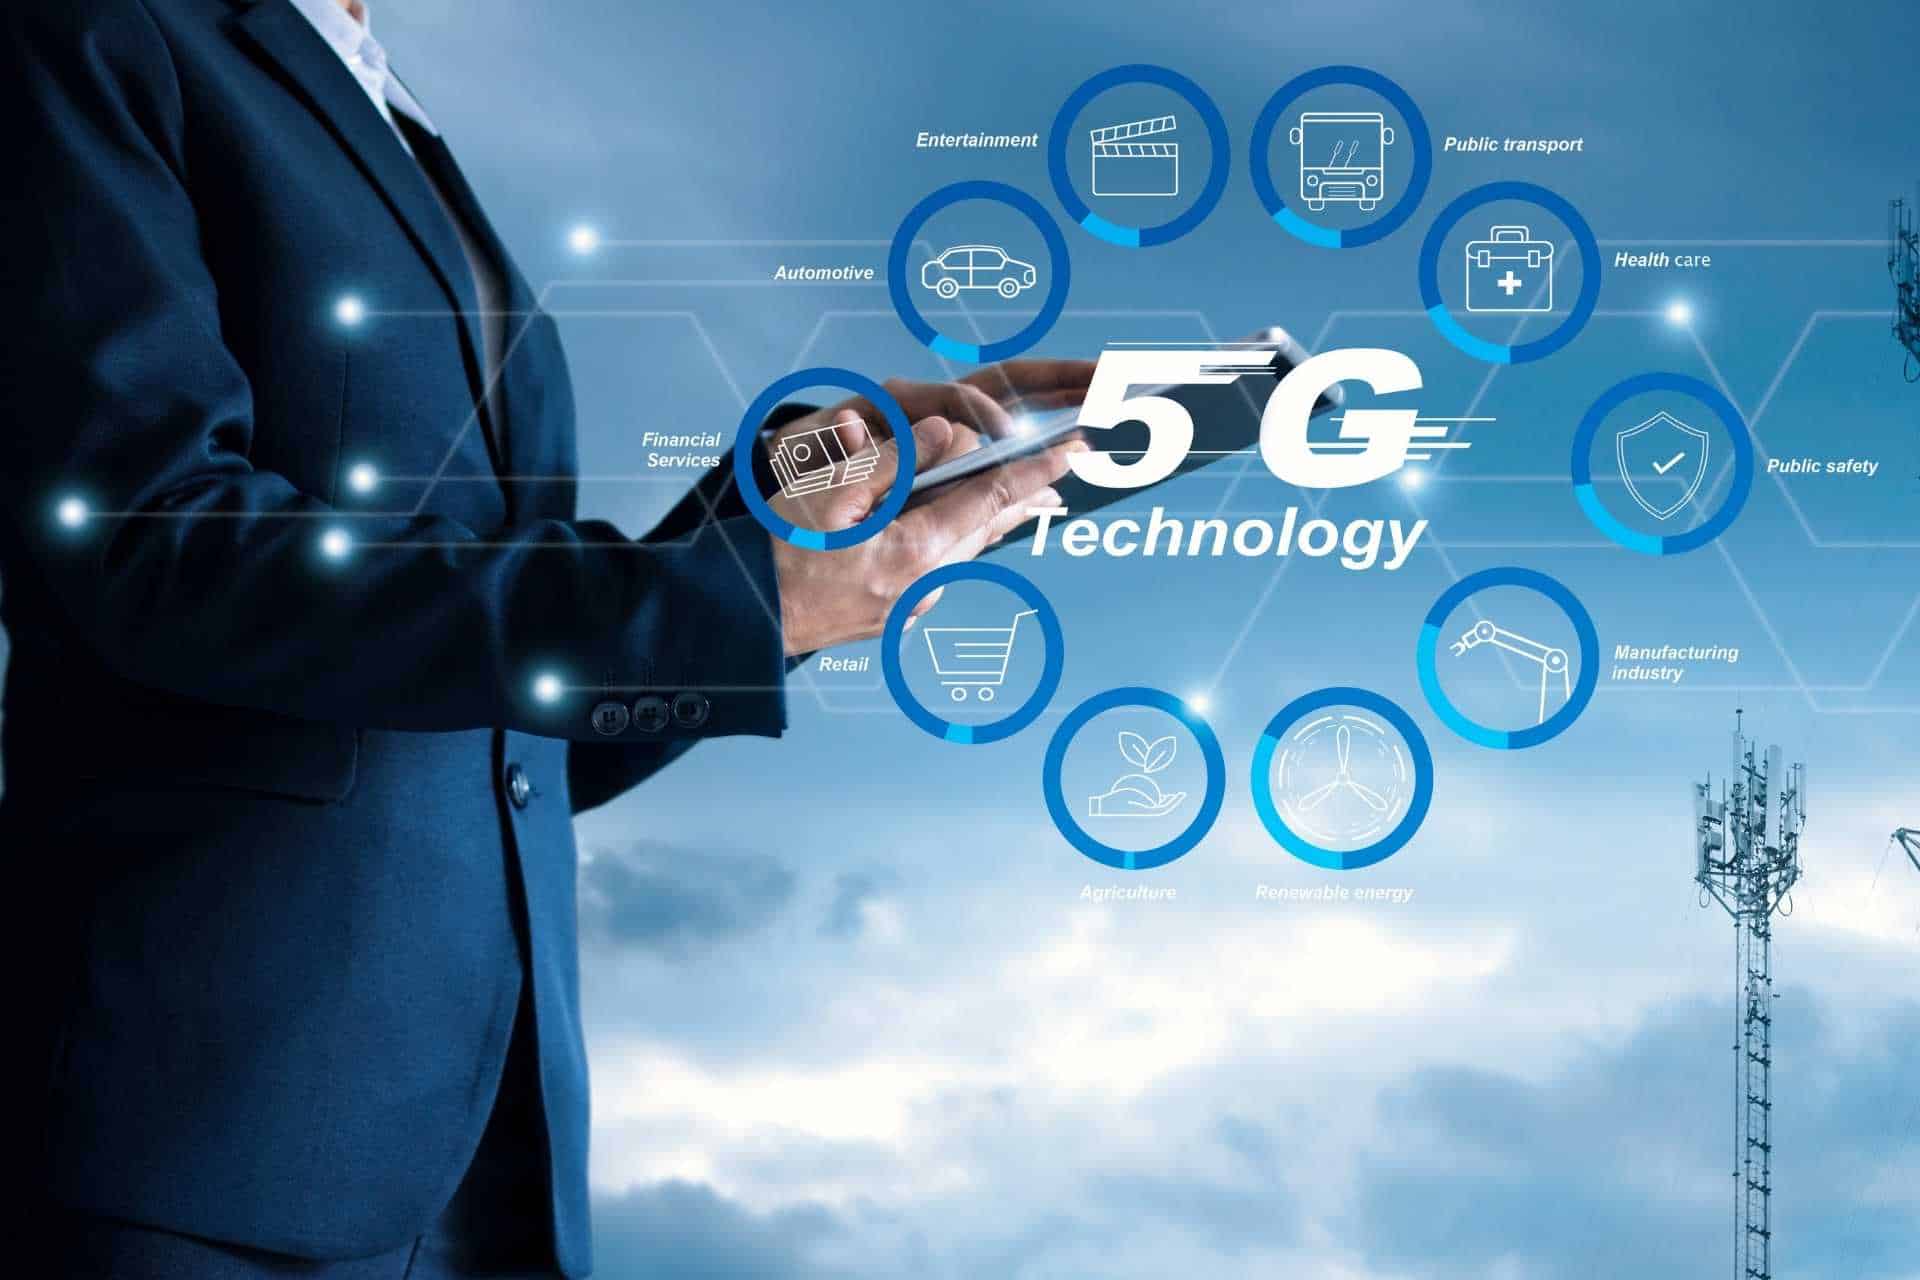 Conceptual image of a businessman using a smartphone with icons representing 5G technology applications across various industries like automotive, healthcare, and public safety, symbolizing the interconnectedness and impact of 5G on modern business including potential applications in hotel guest journey mapping.